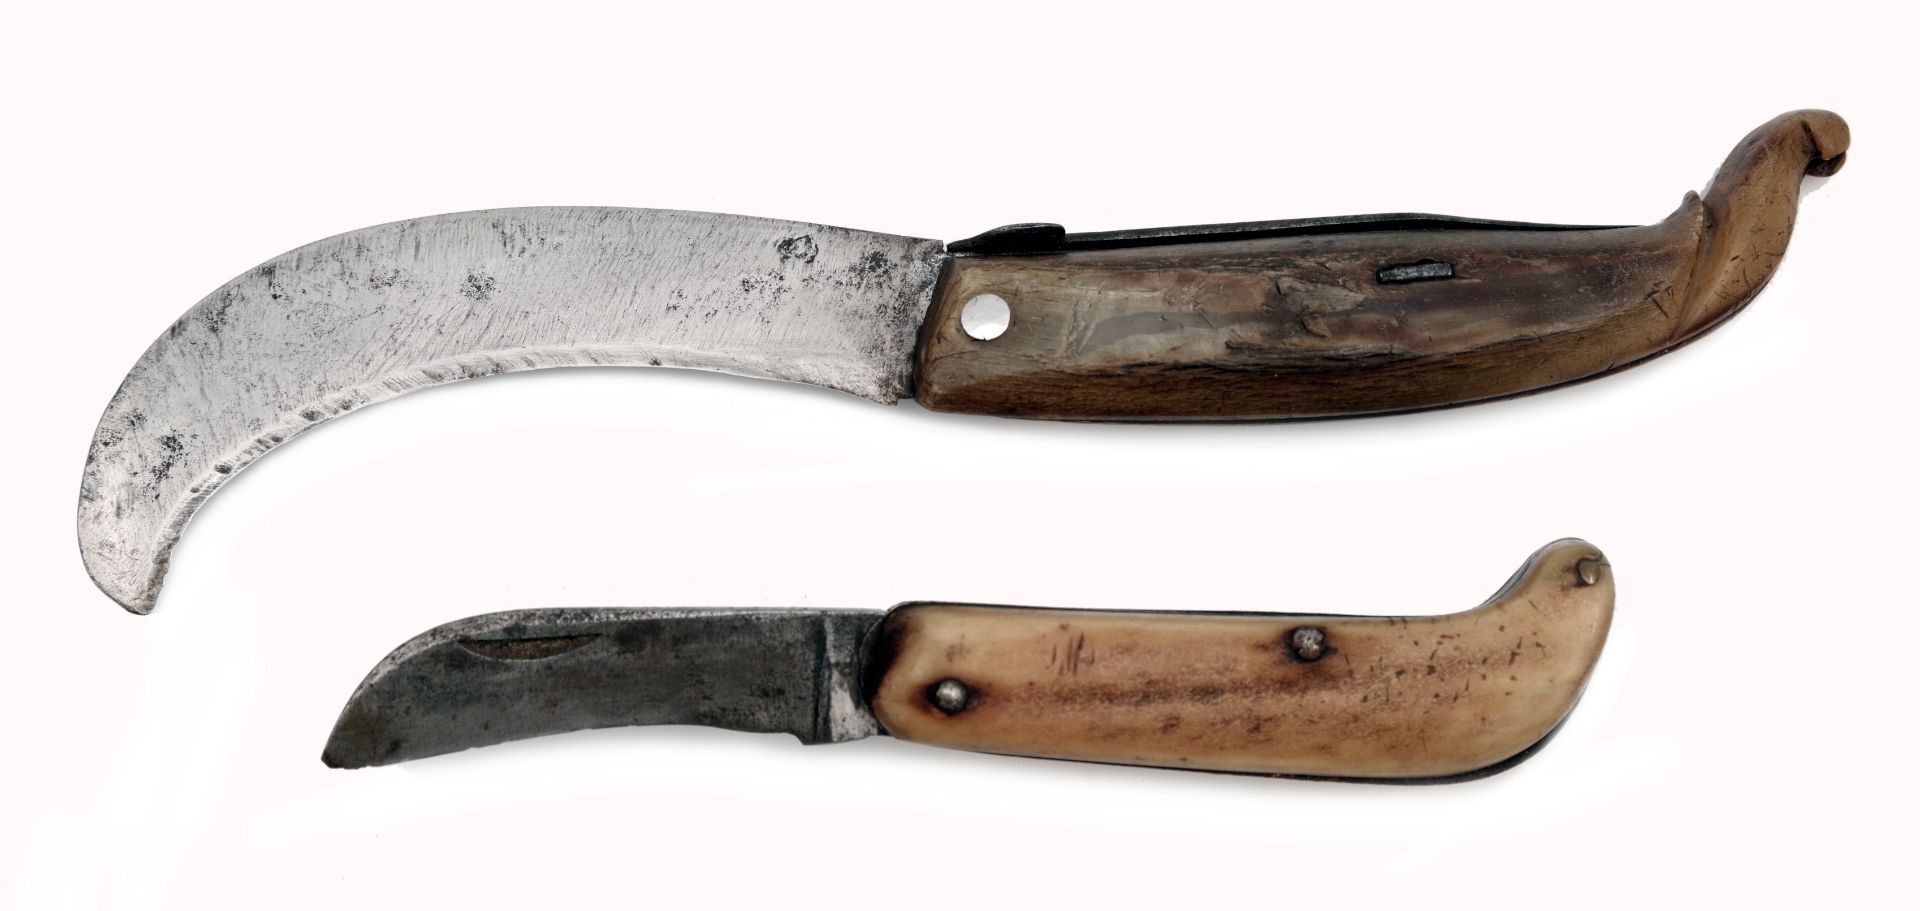 Two Folding Knives - Image 3 of 4